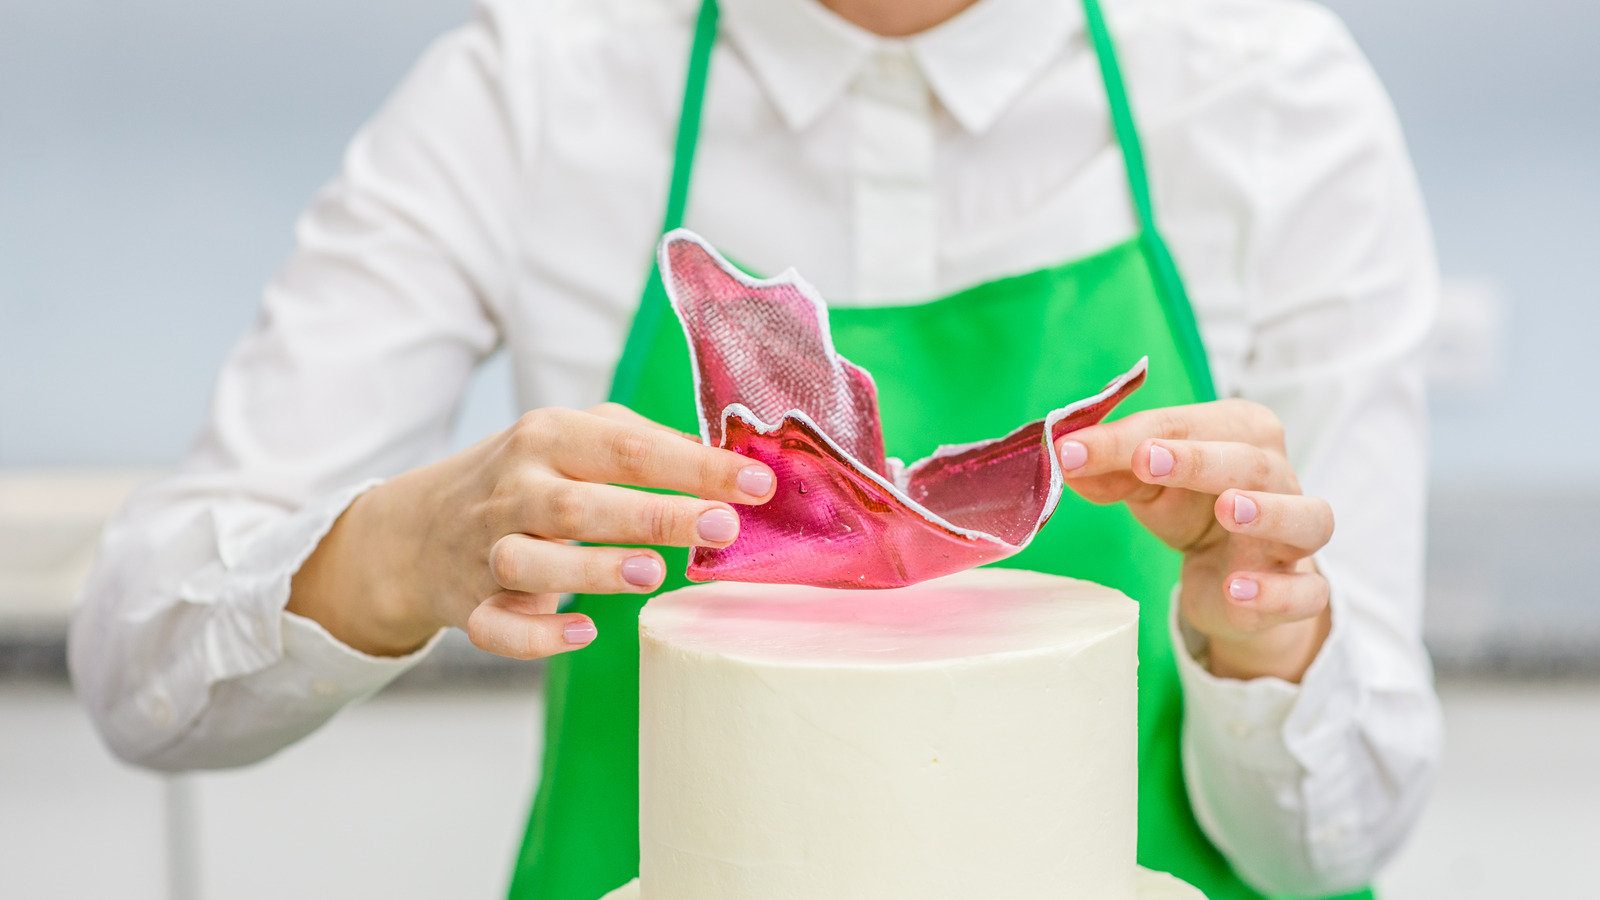 What is Isomalt? What is it good for?